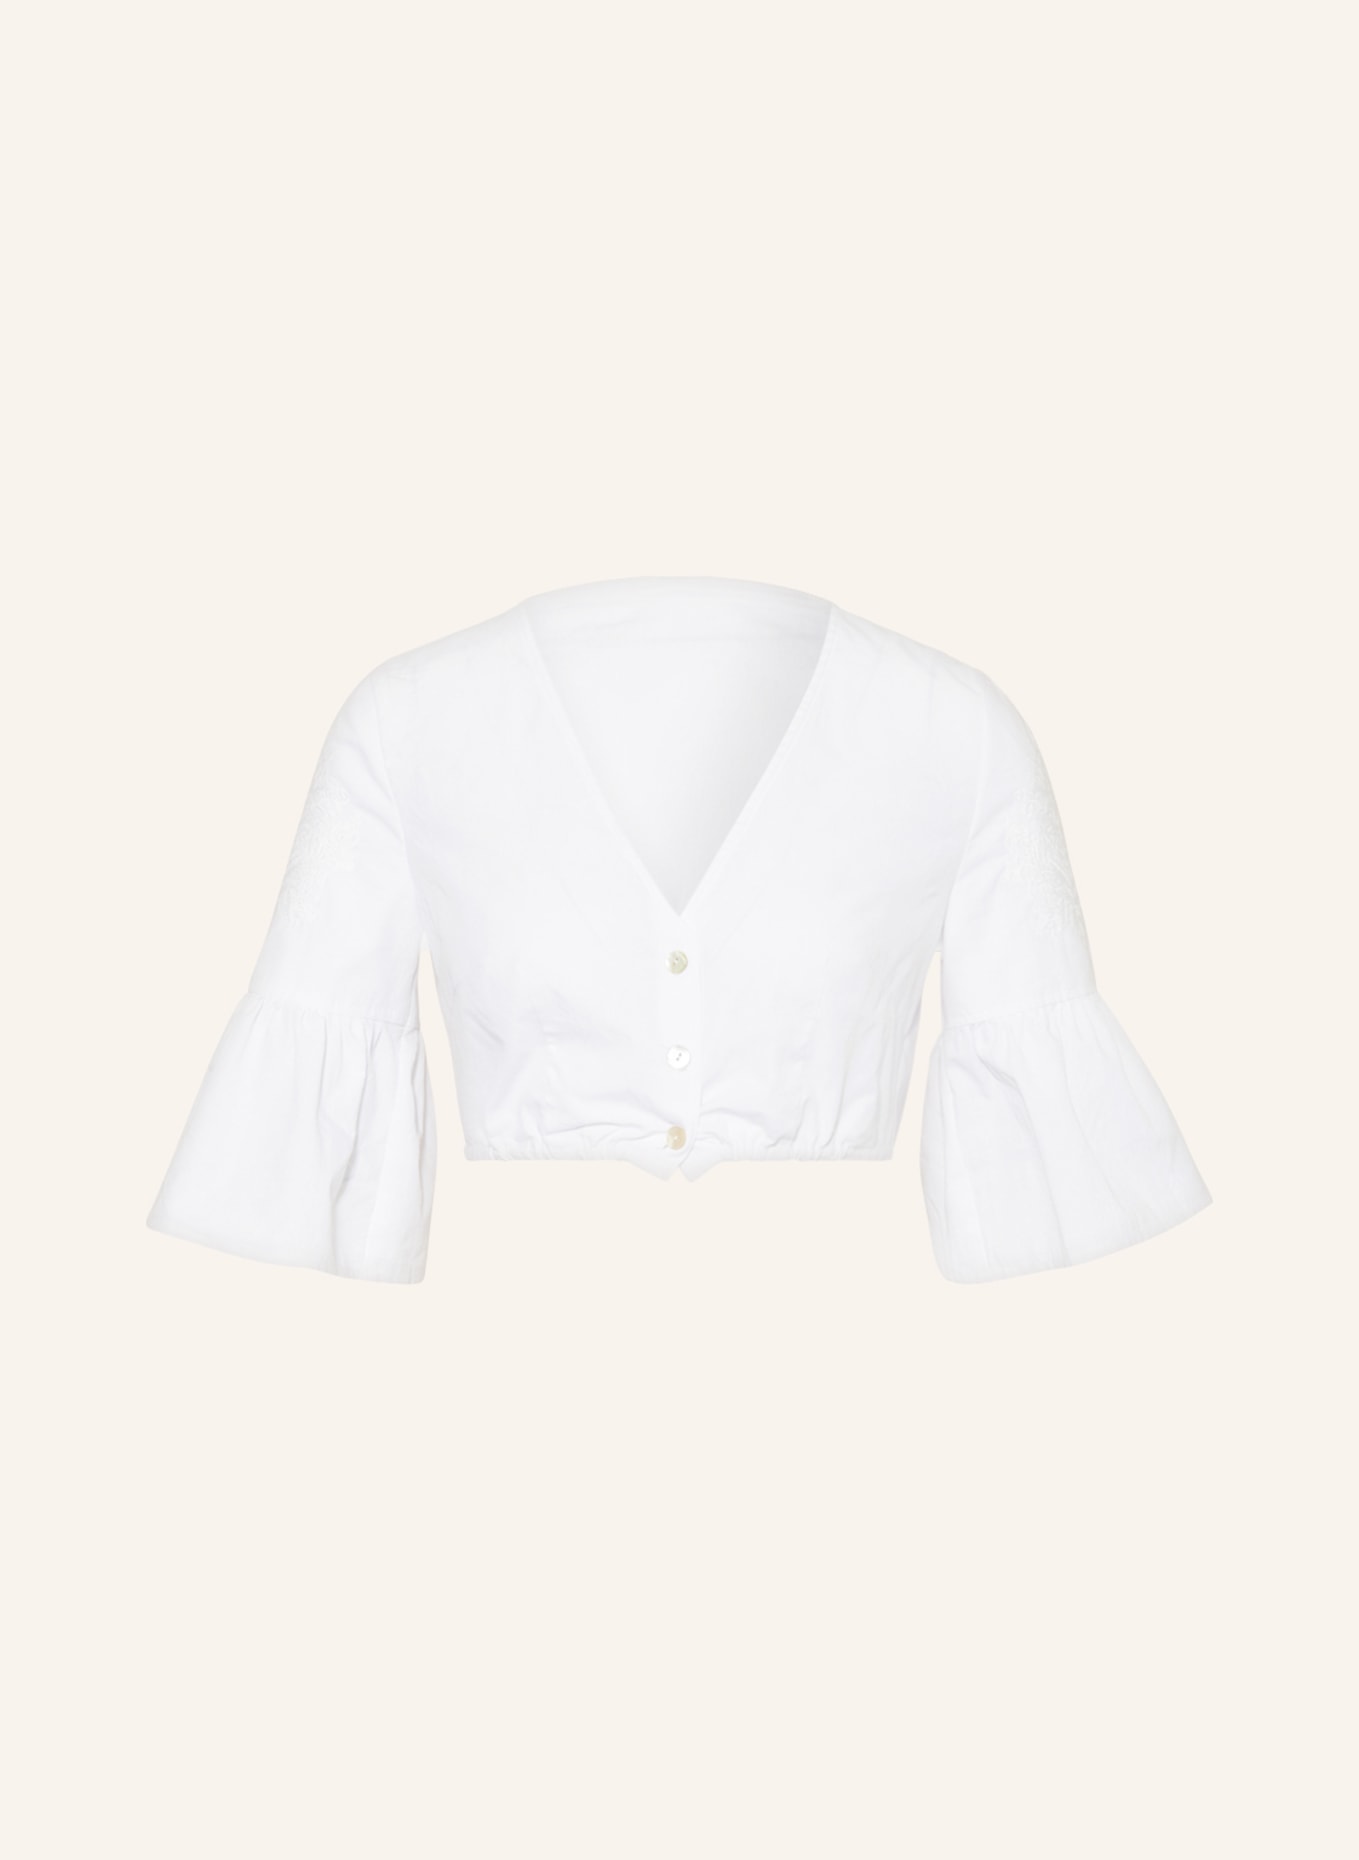 SPORTALM Dirndl blouse with embroidery, Color: WHITE (Image 1)